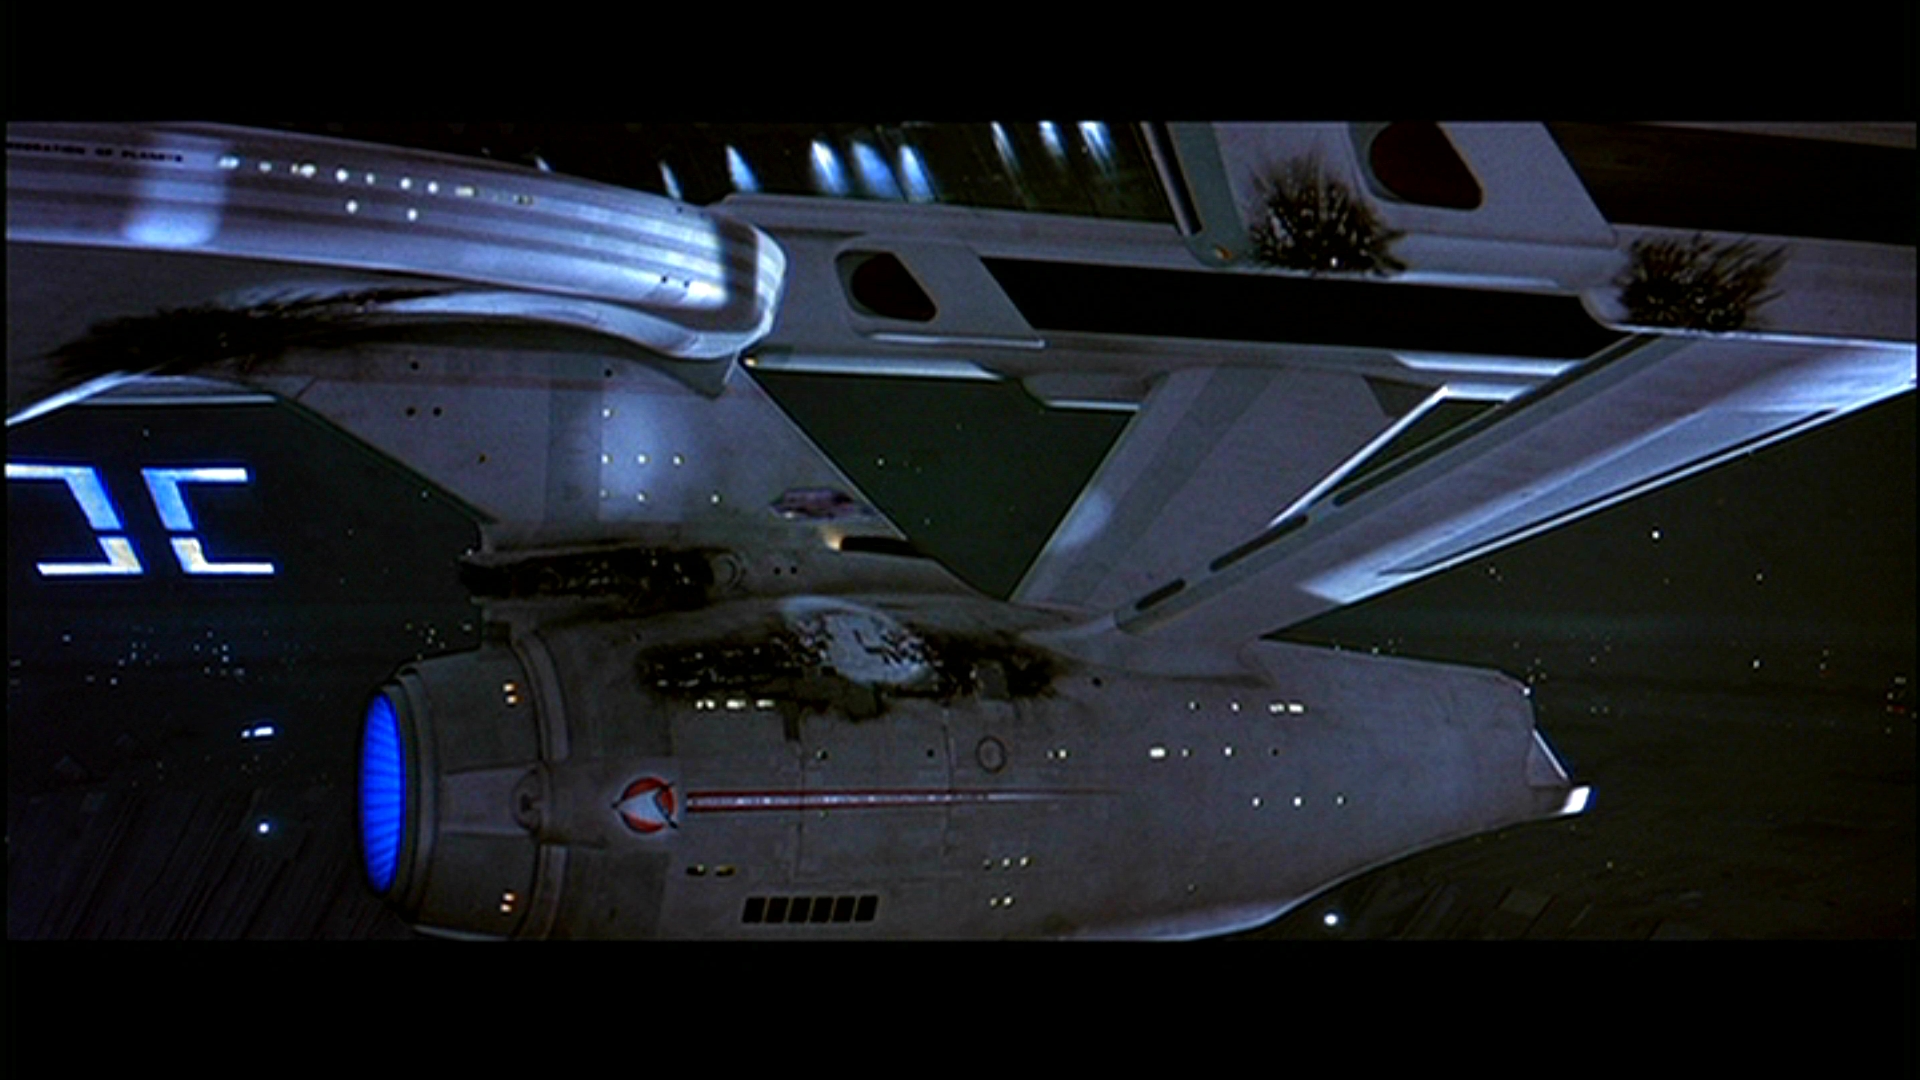 Movie Star Trek III: The Search for Spock HD Wallpaper | Background Image